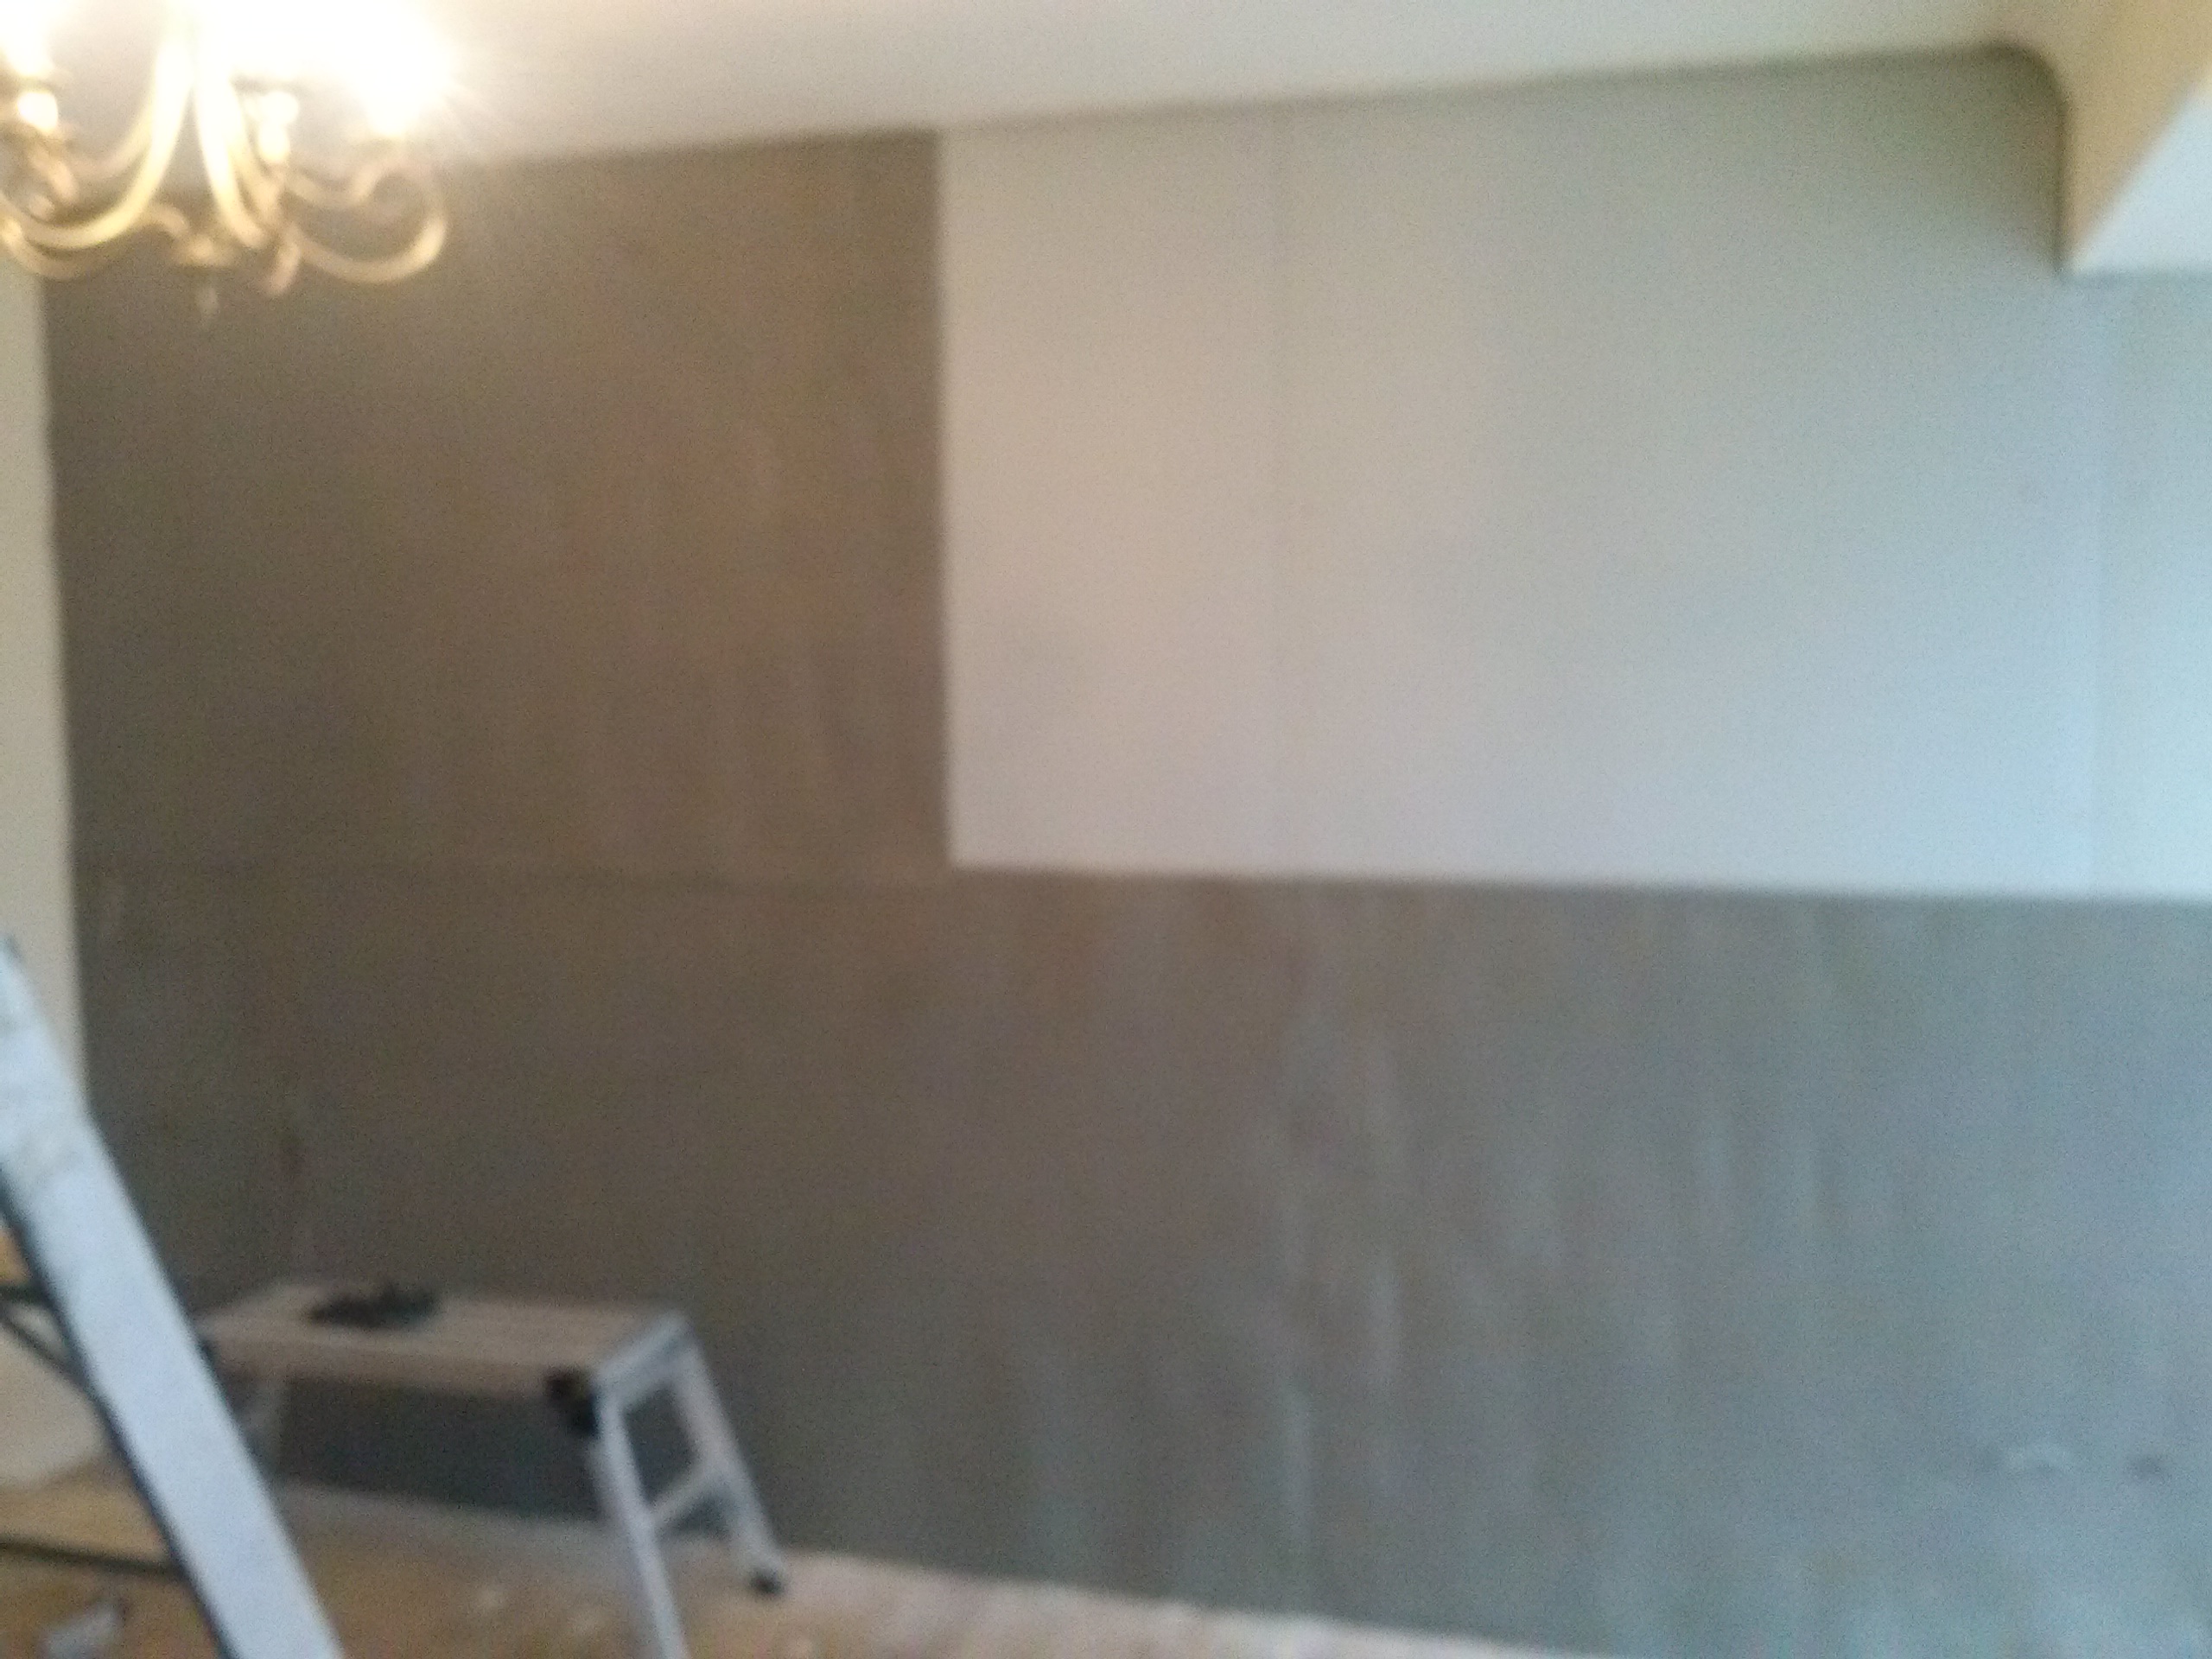 Membrane fitted to wall